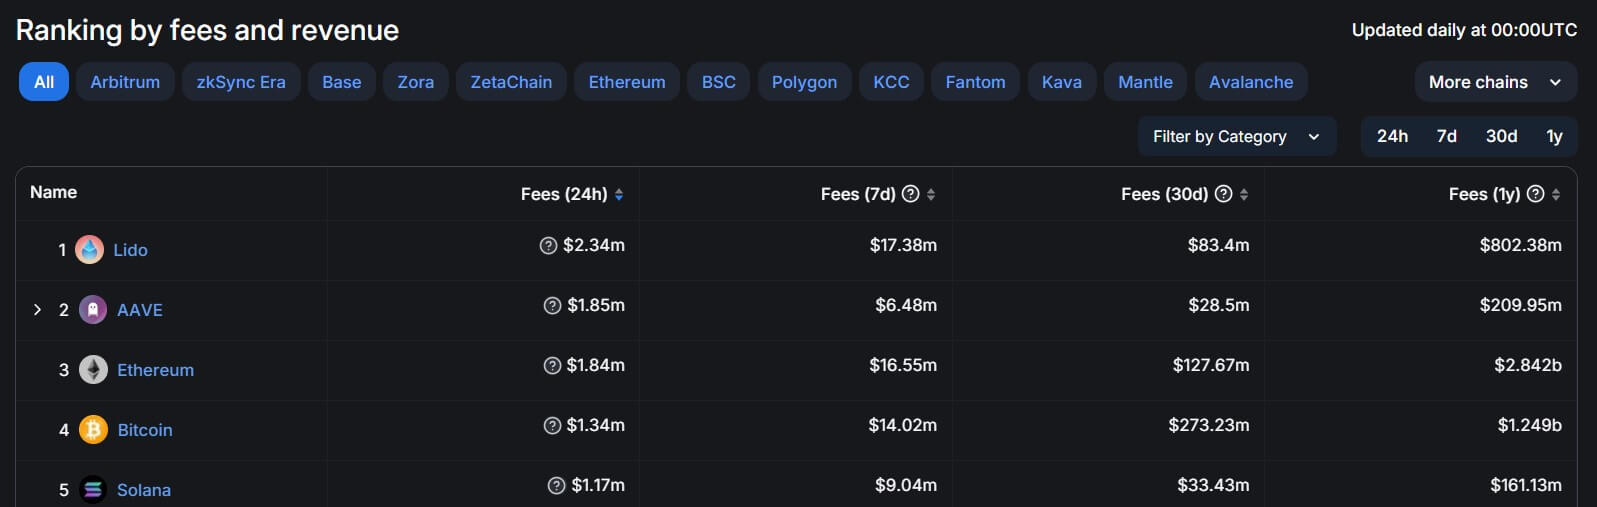 DeFi platforms Lido and Aave surpass Bitcoin and Ethereum in fee generation